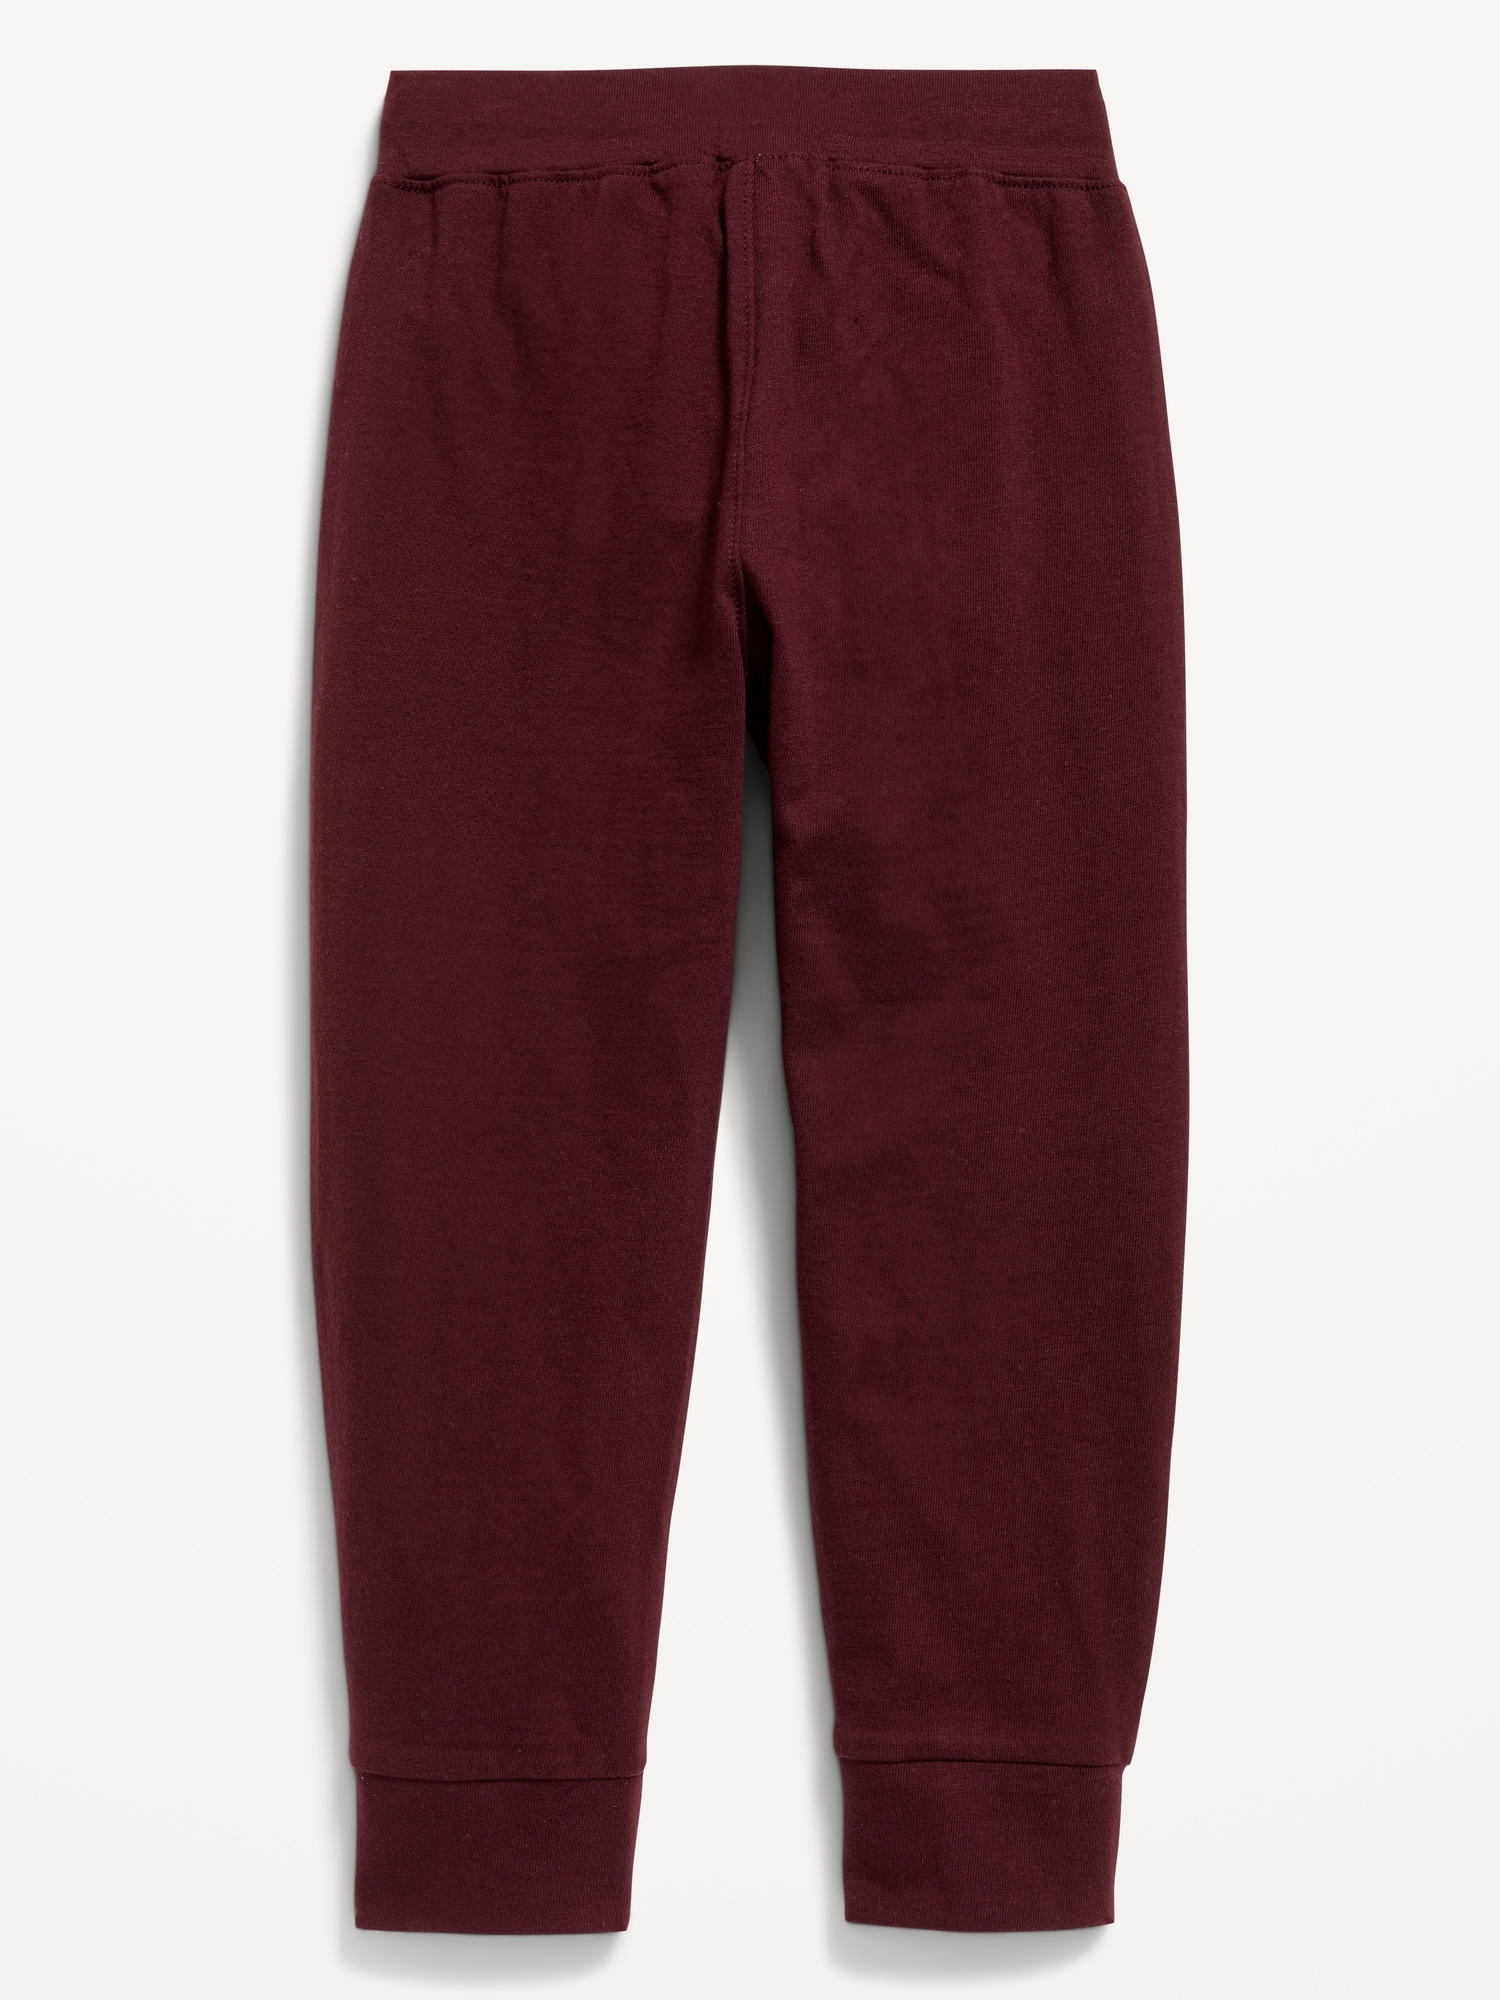 Unisex Functional Drawstring Solid Sweatpants for Toddler | Old Navy